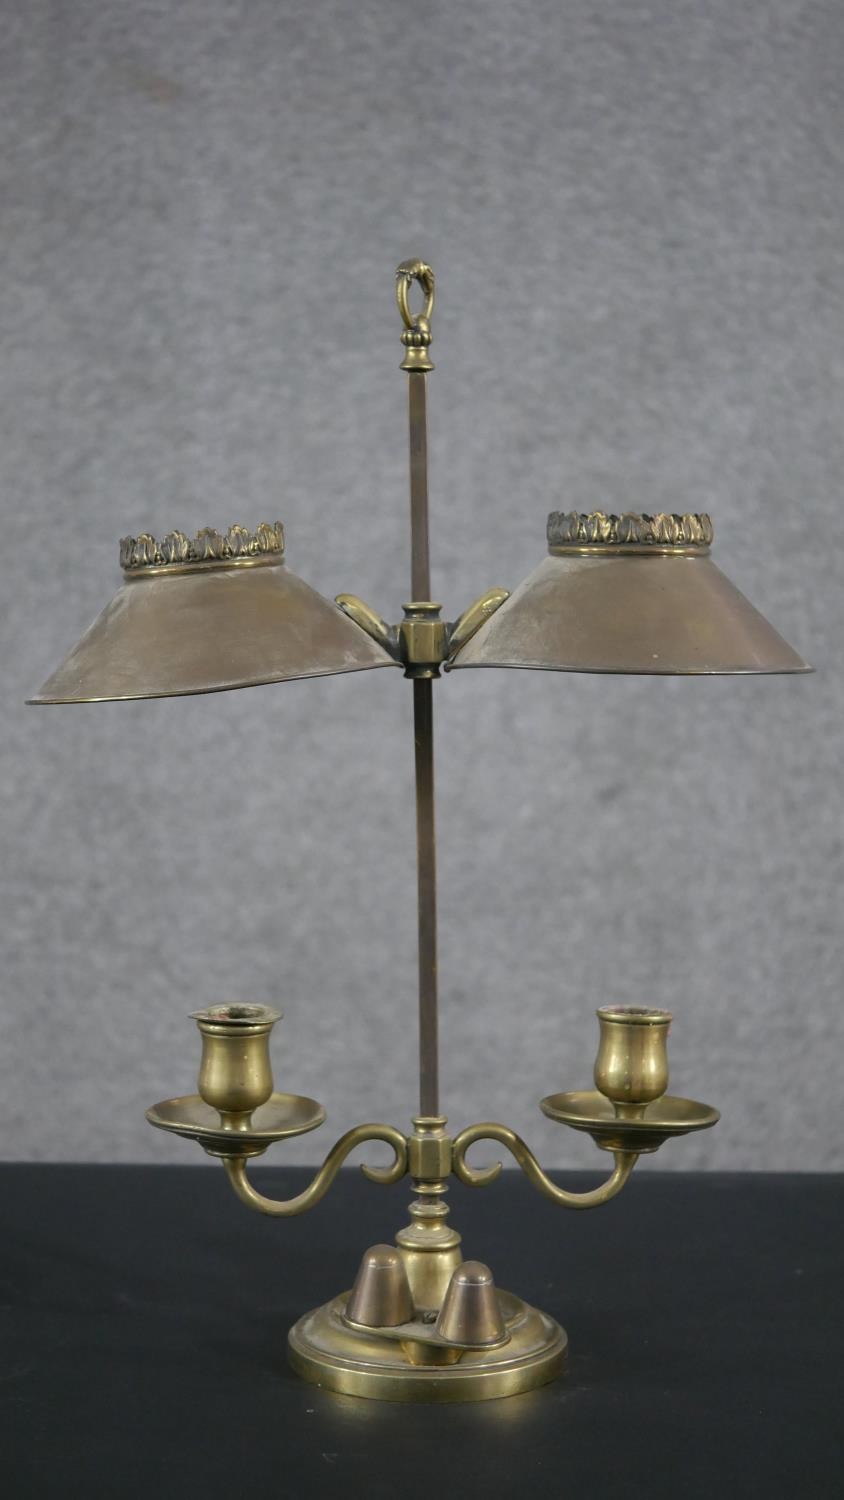 A 19th century brass double rise and fall student's candle lamp with scrolled arm supports. H.49 W.